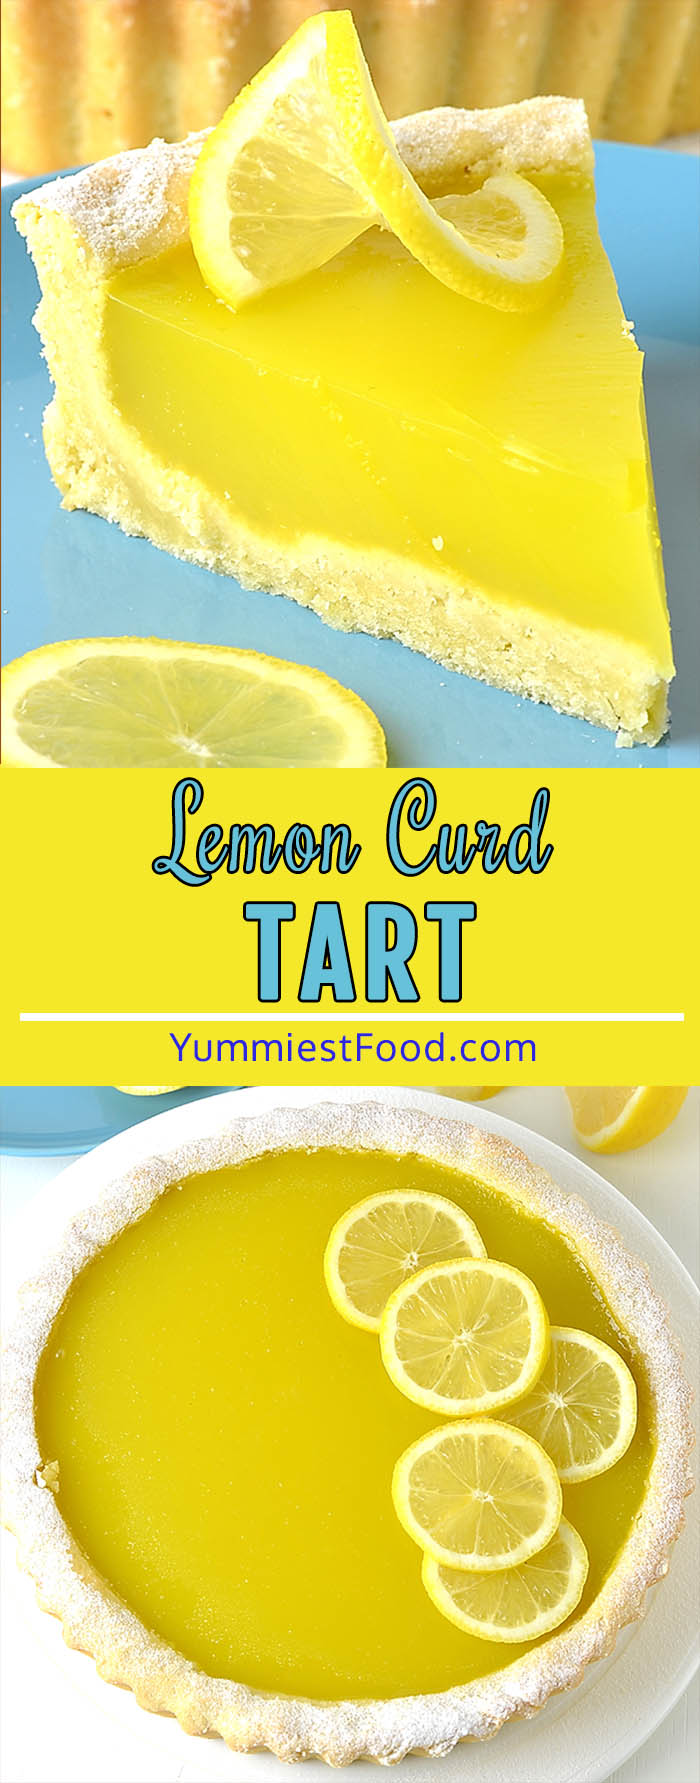 Lemon Curd Tart is a tangy, refreshing, and light dessert! This tart makes the perfect recipe for decadent and rich French desserts!